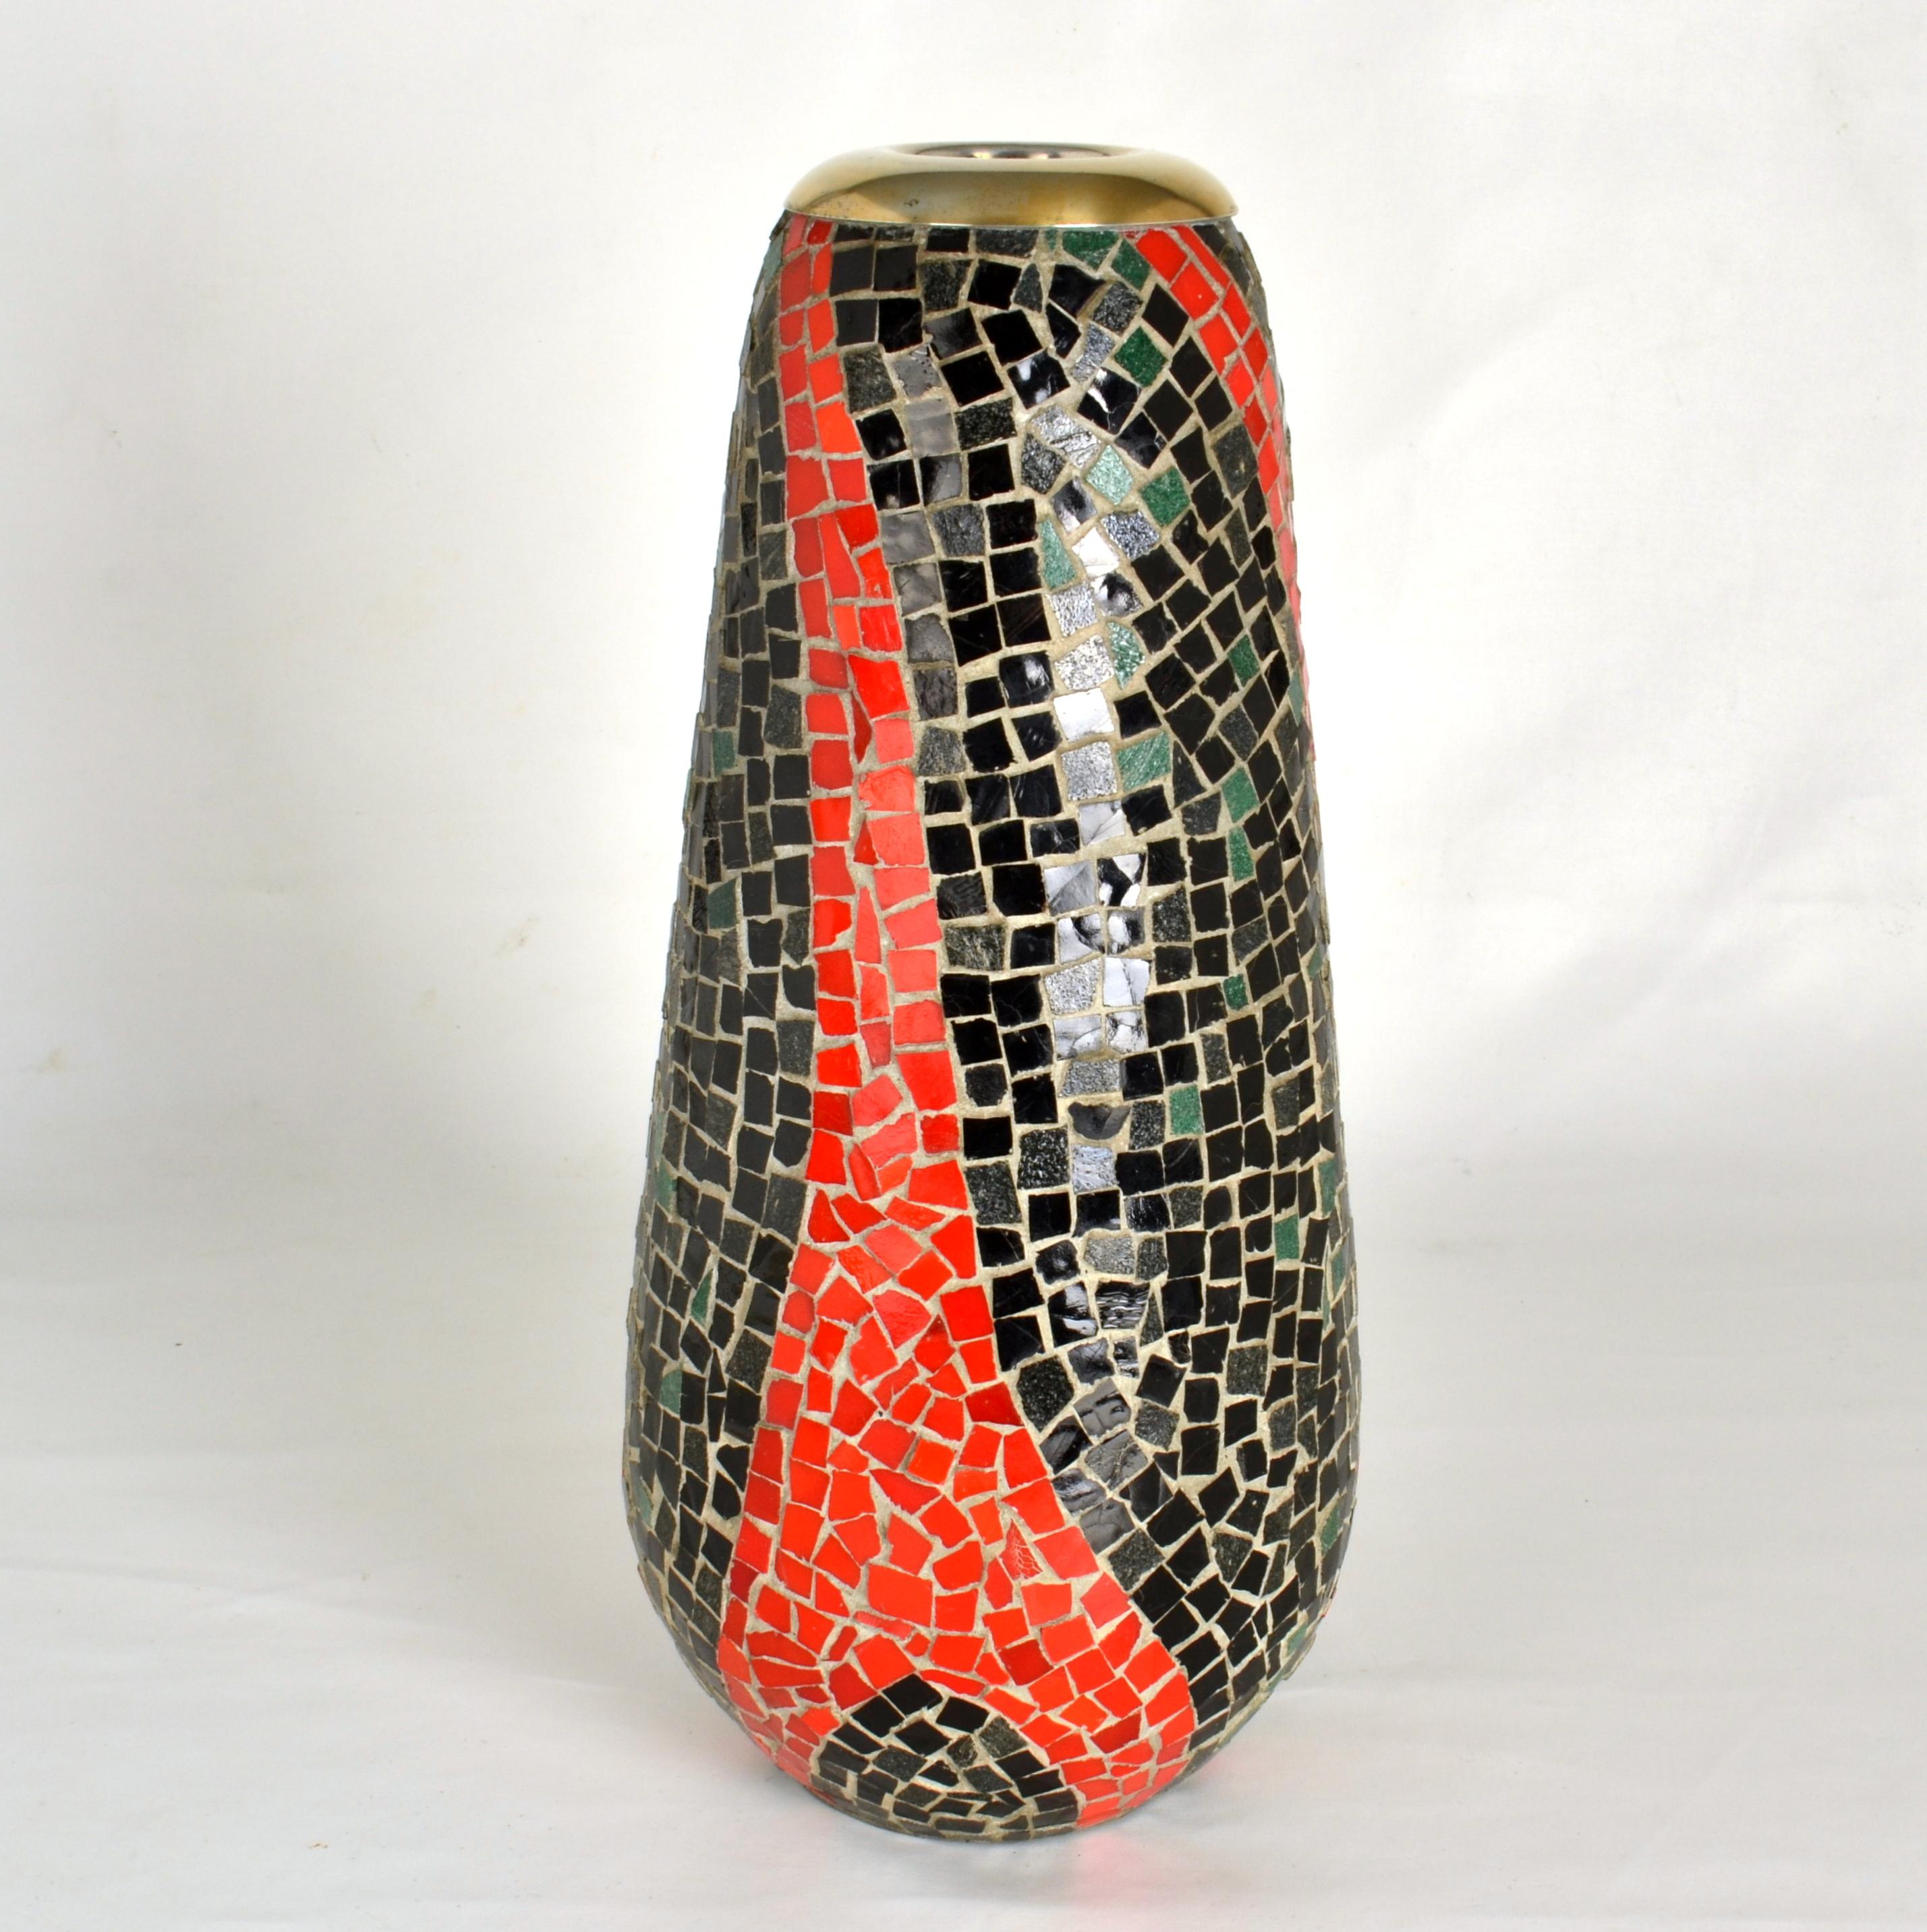 Tall vase in an organic mosaic pattern of night black and tomato red pieces of glass. The mosaic is applied on  a glass vase inorder to be a functional vase for flowers and it is edged with a brass edge. The opening is4.5 cm diameter.